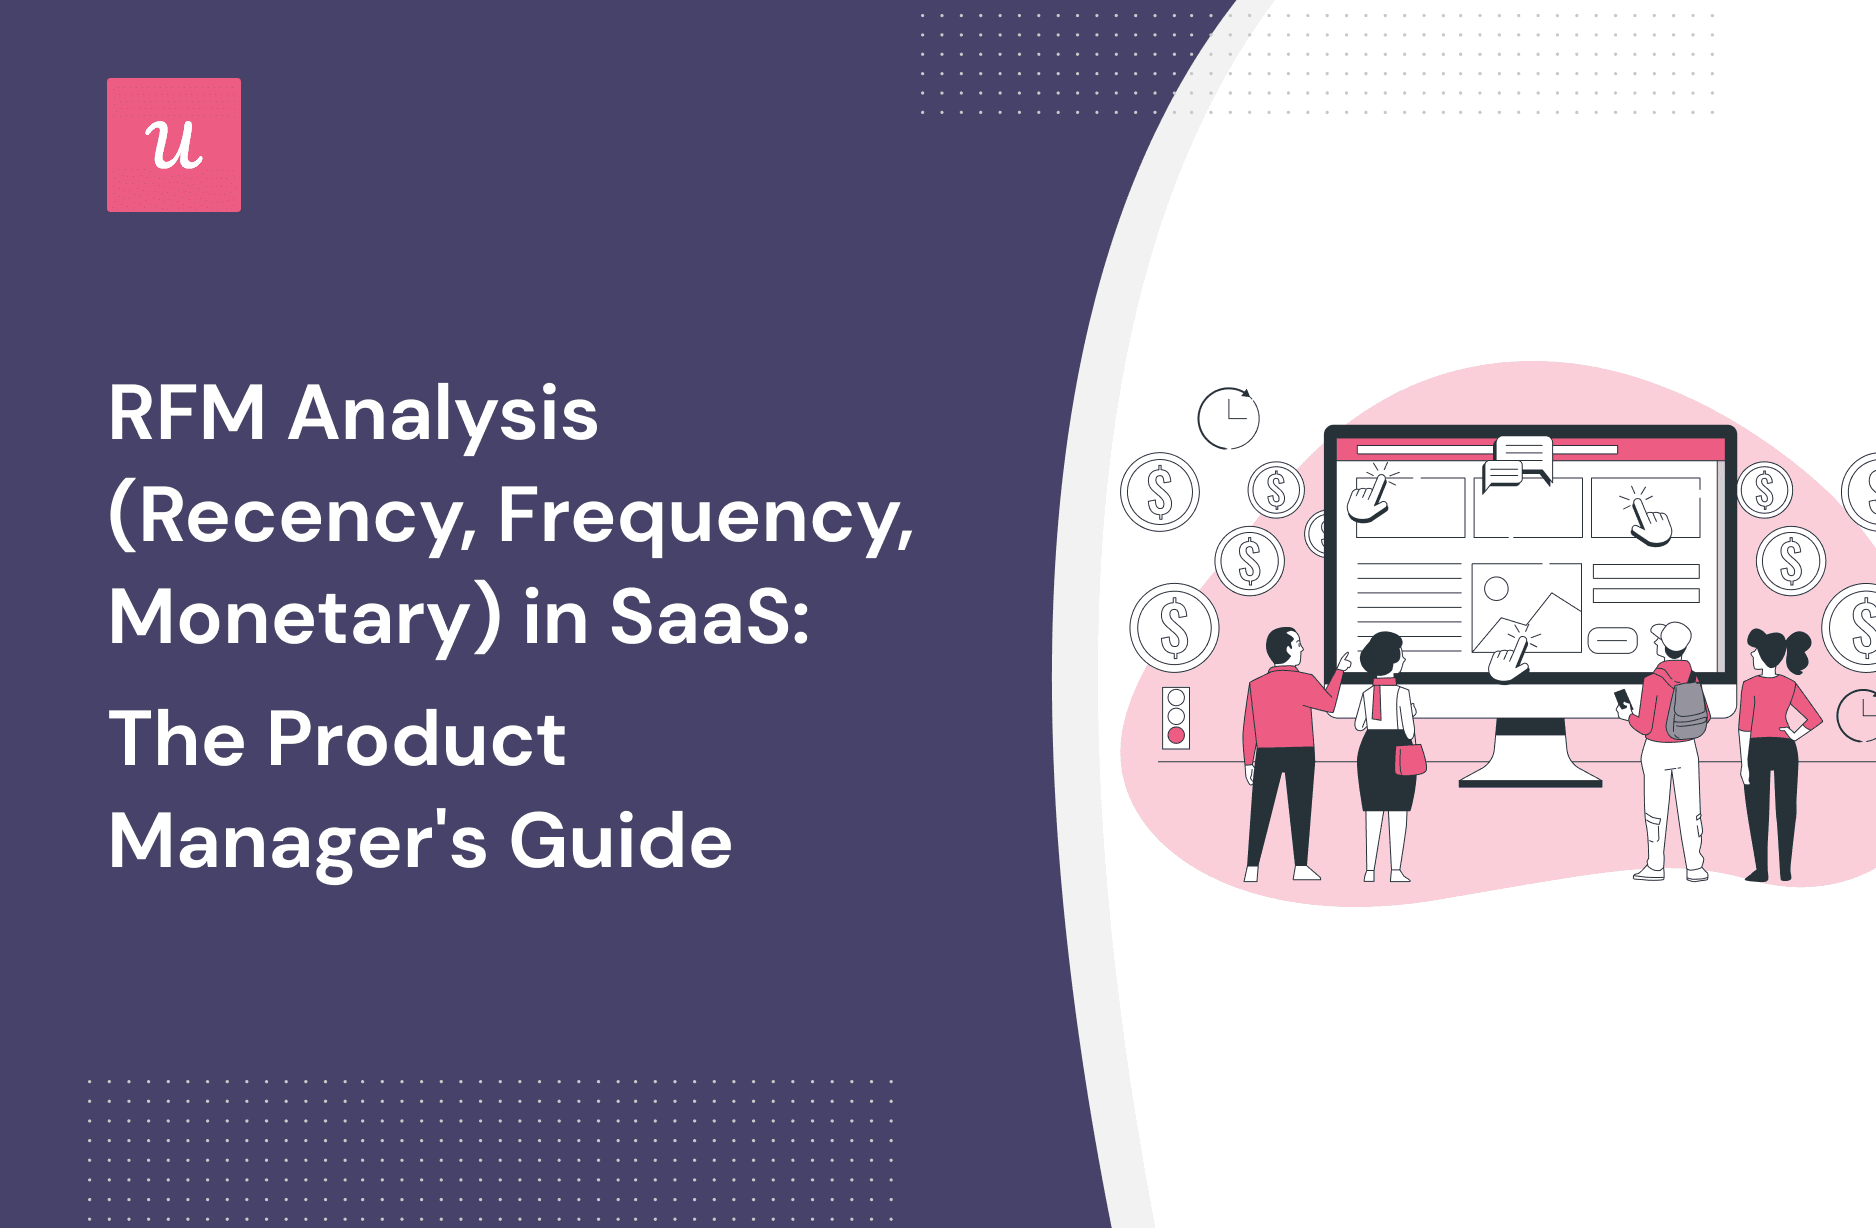 RFM Analysis (Recency, Frequency, Monetary) in SaaS: The Product Manager's Guide cover